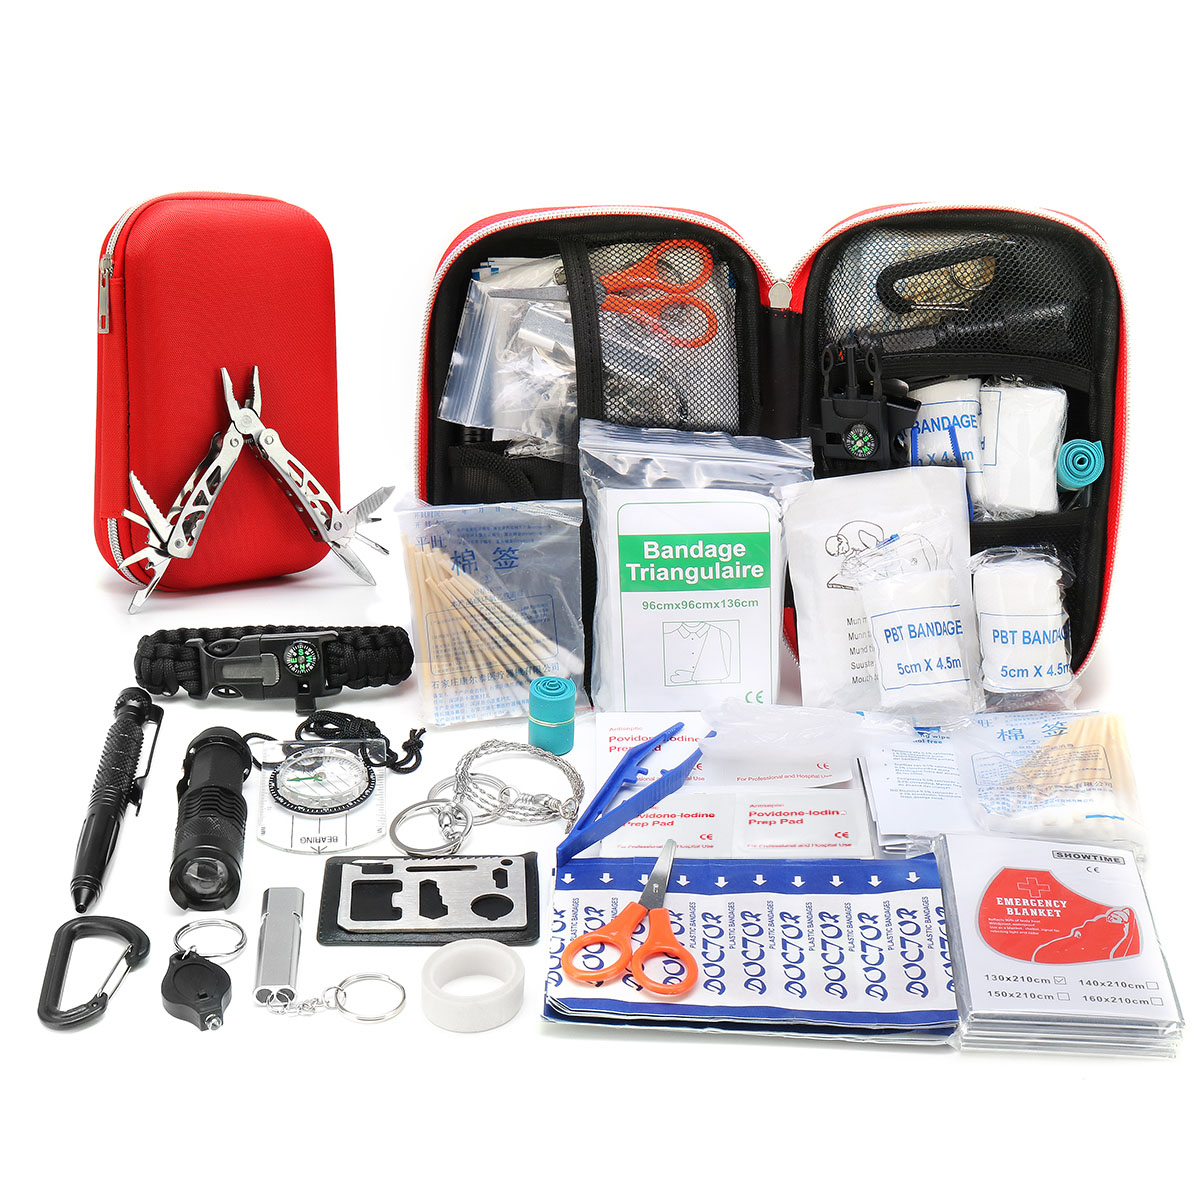 SOS-Tools-Kit-Outdoor-Emergency-Equipment-Box-For-Camping-Survival-Gear-Kit-1412898-5